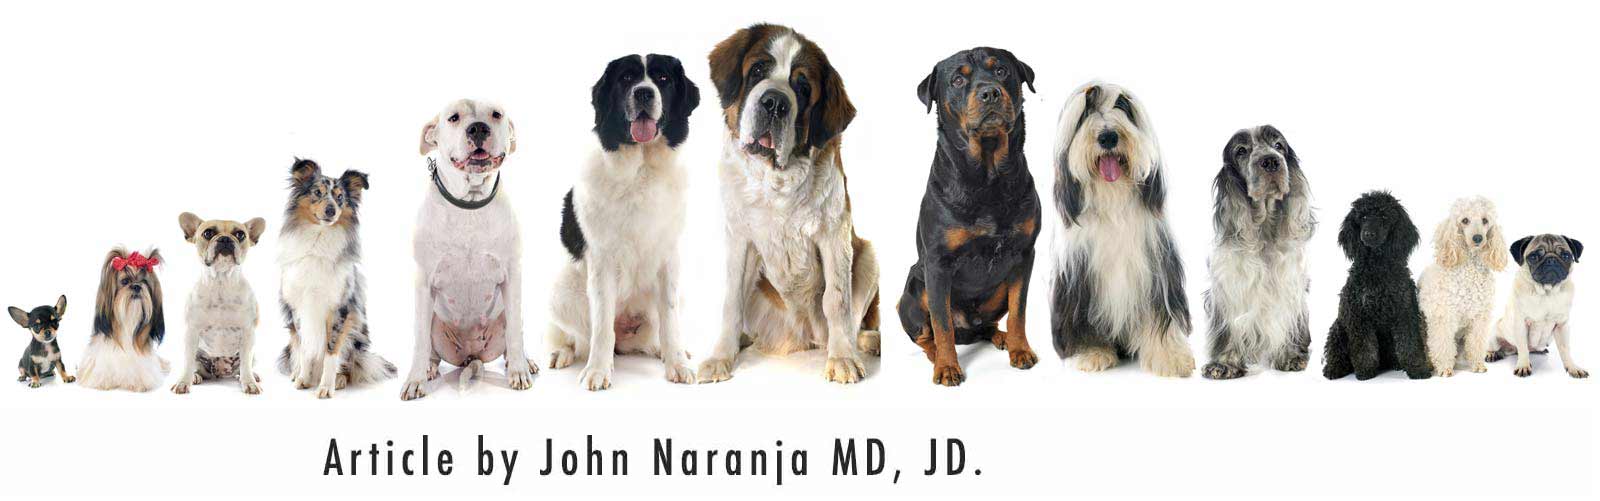 dogs of all sizes and shapes, article by dr. john naranja, md, jd